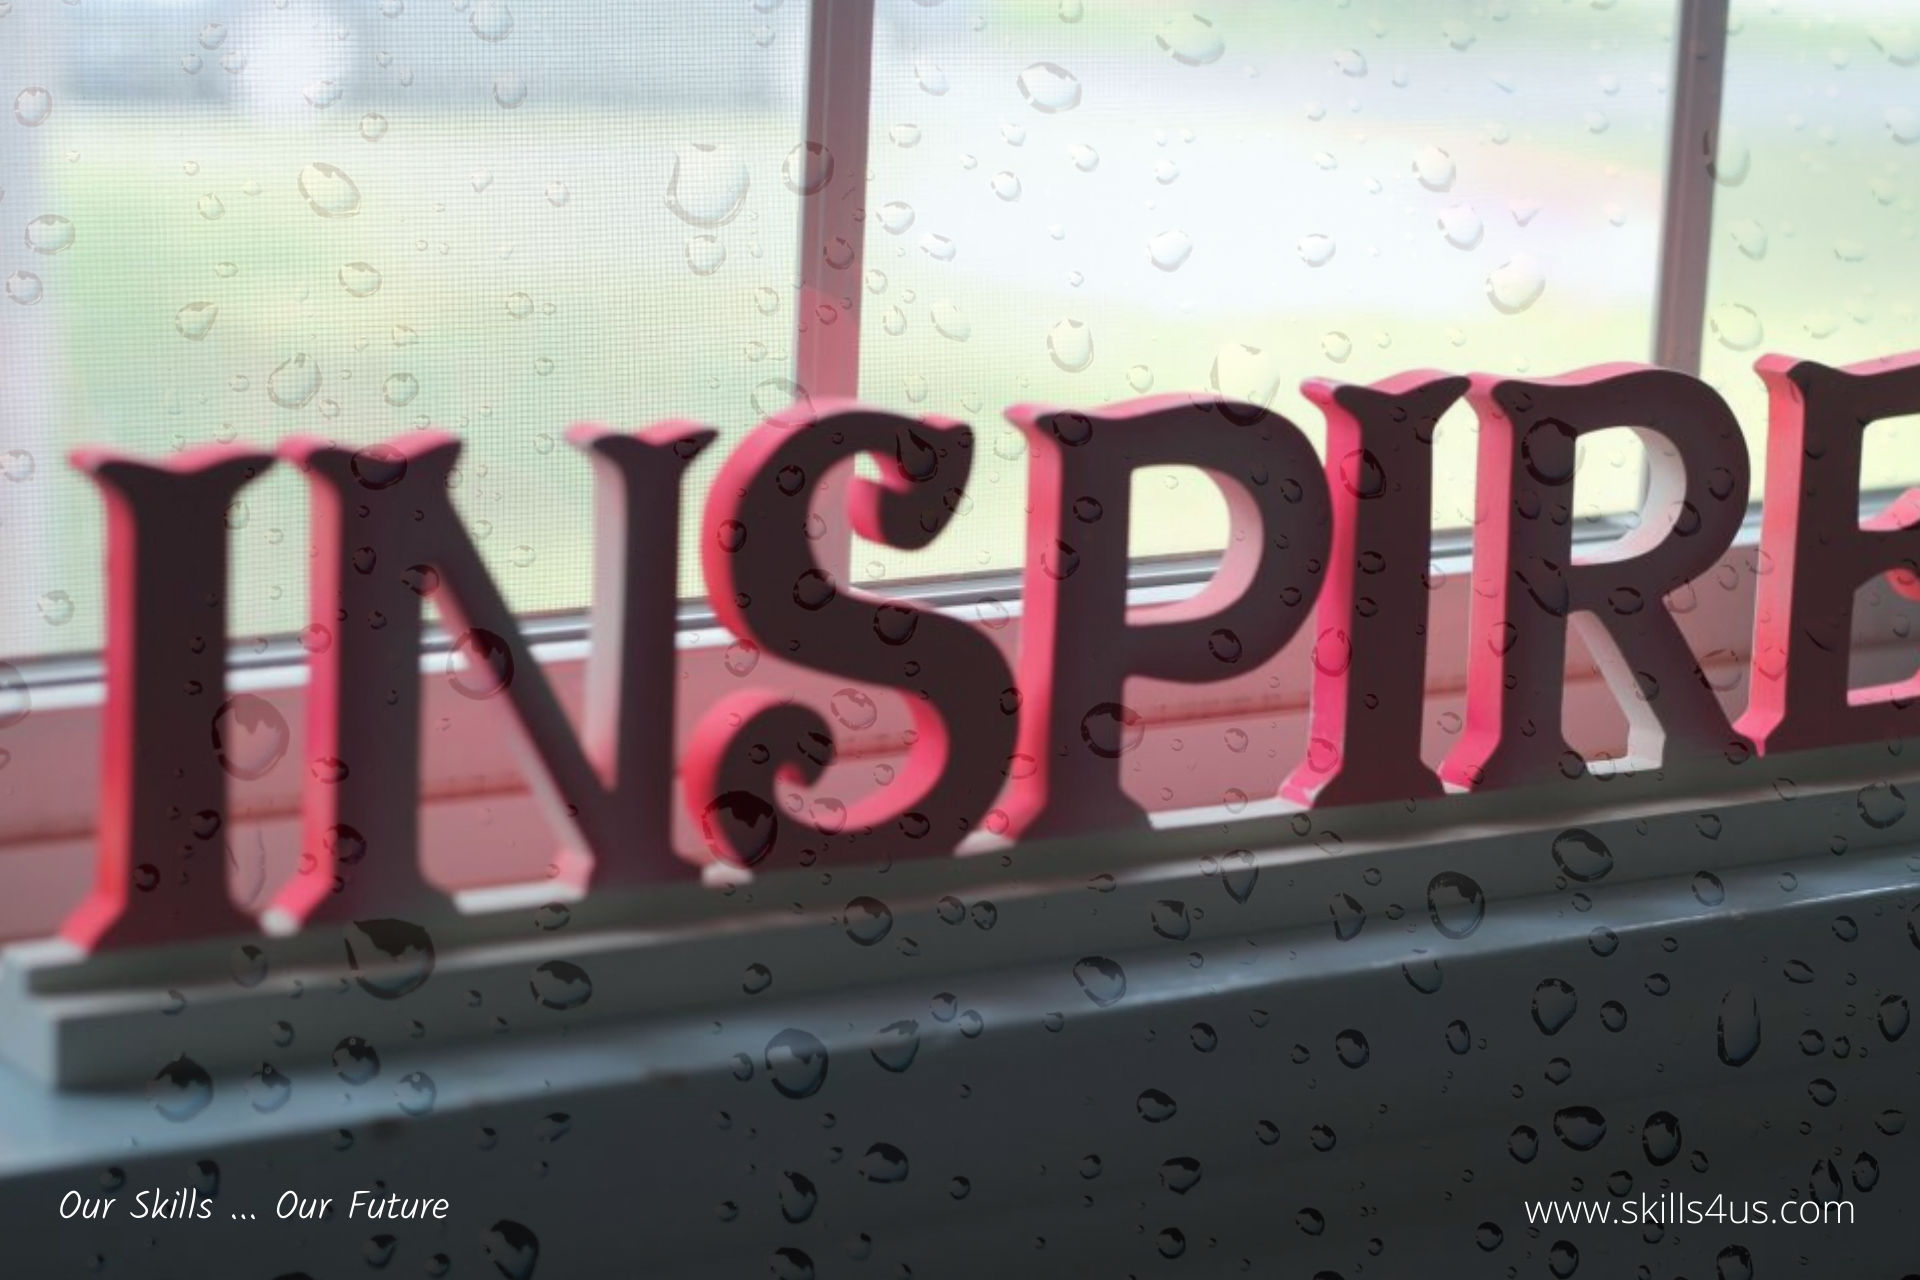 ways That Will guide how you Inspire Your Employees for high performance